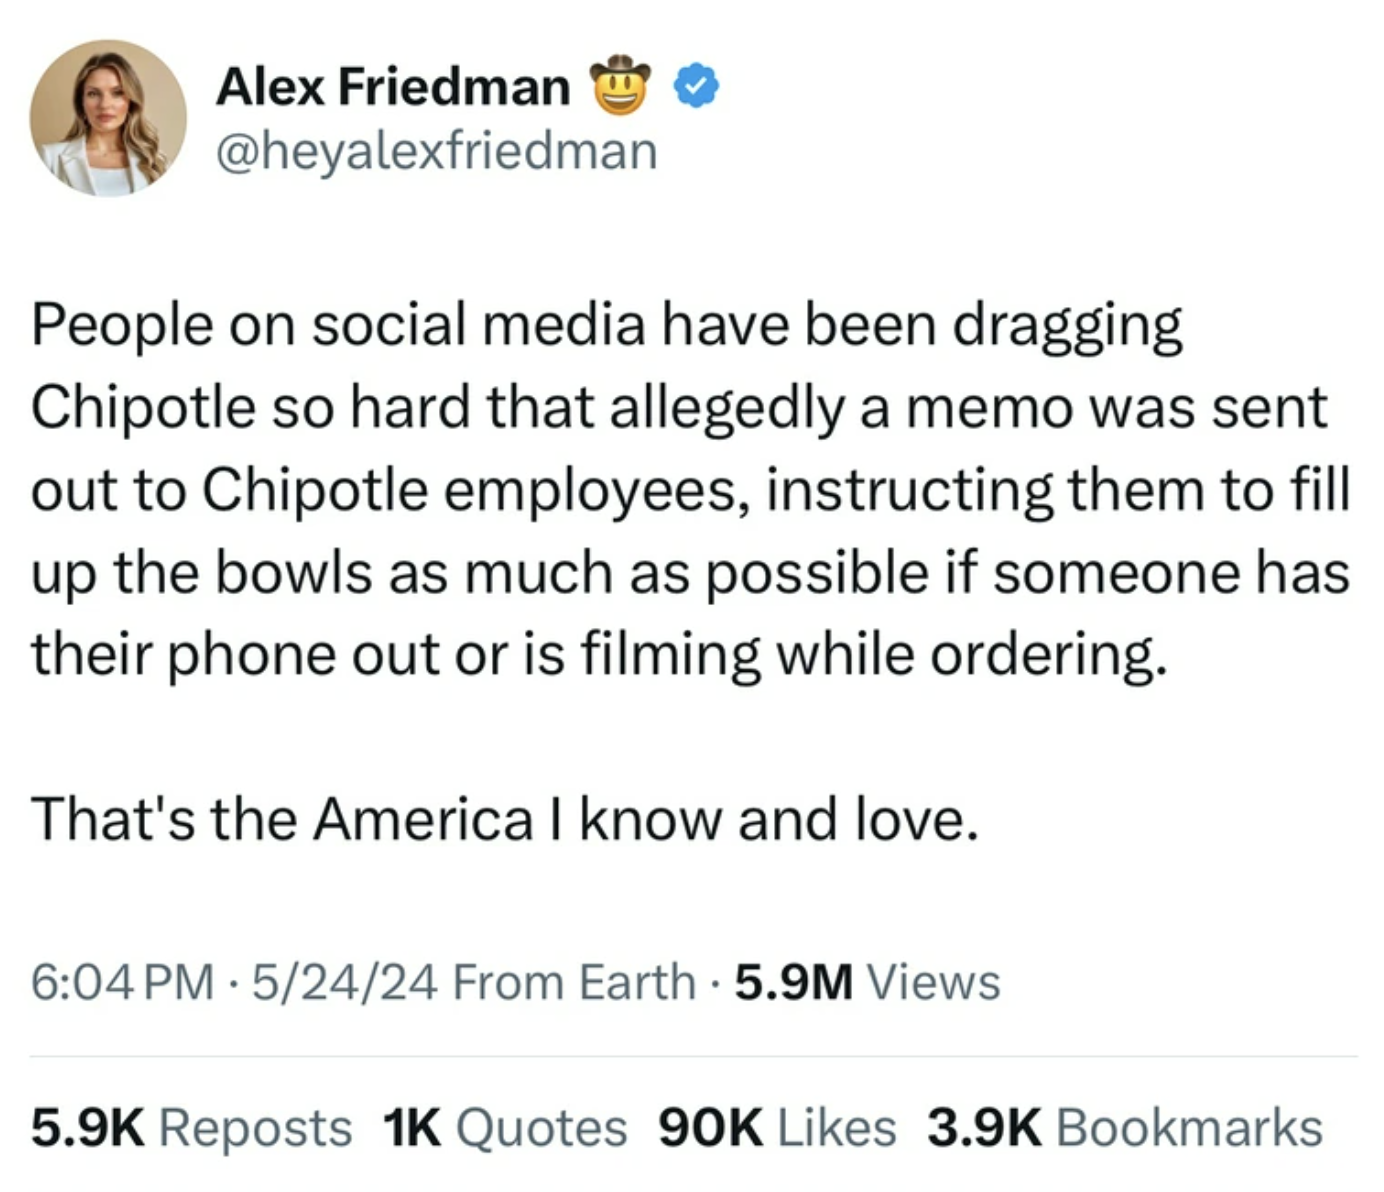 screenshot - Alex Friedman People on social media have been dragging Chipotle so hard that allegedly a memo was sent out to Chipotle employees, instructing them to fill up the bowls as much as possible if someone has their phone out or is filming while or